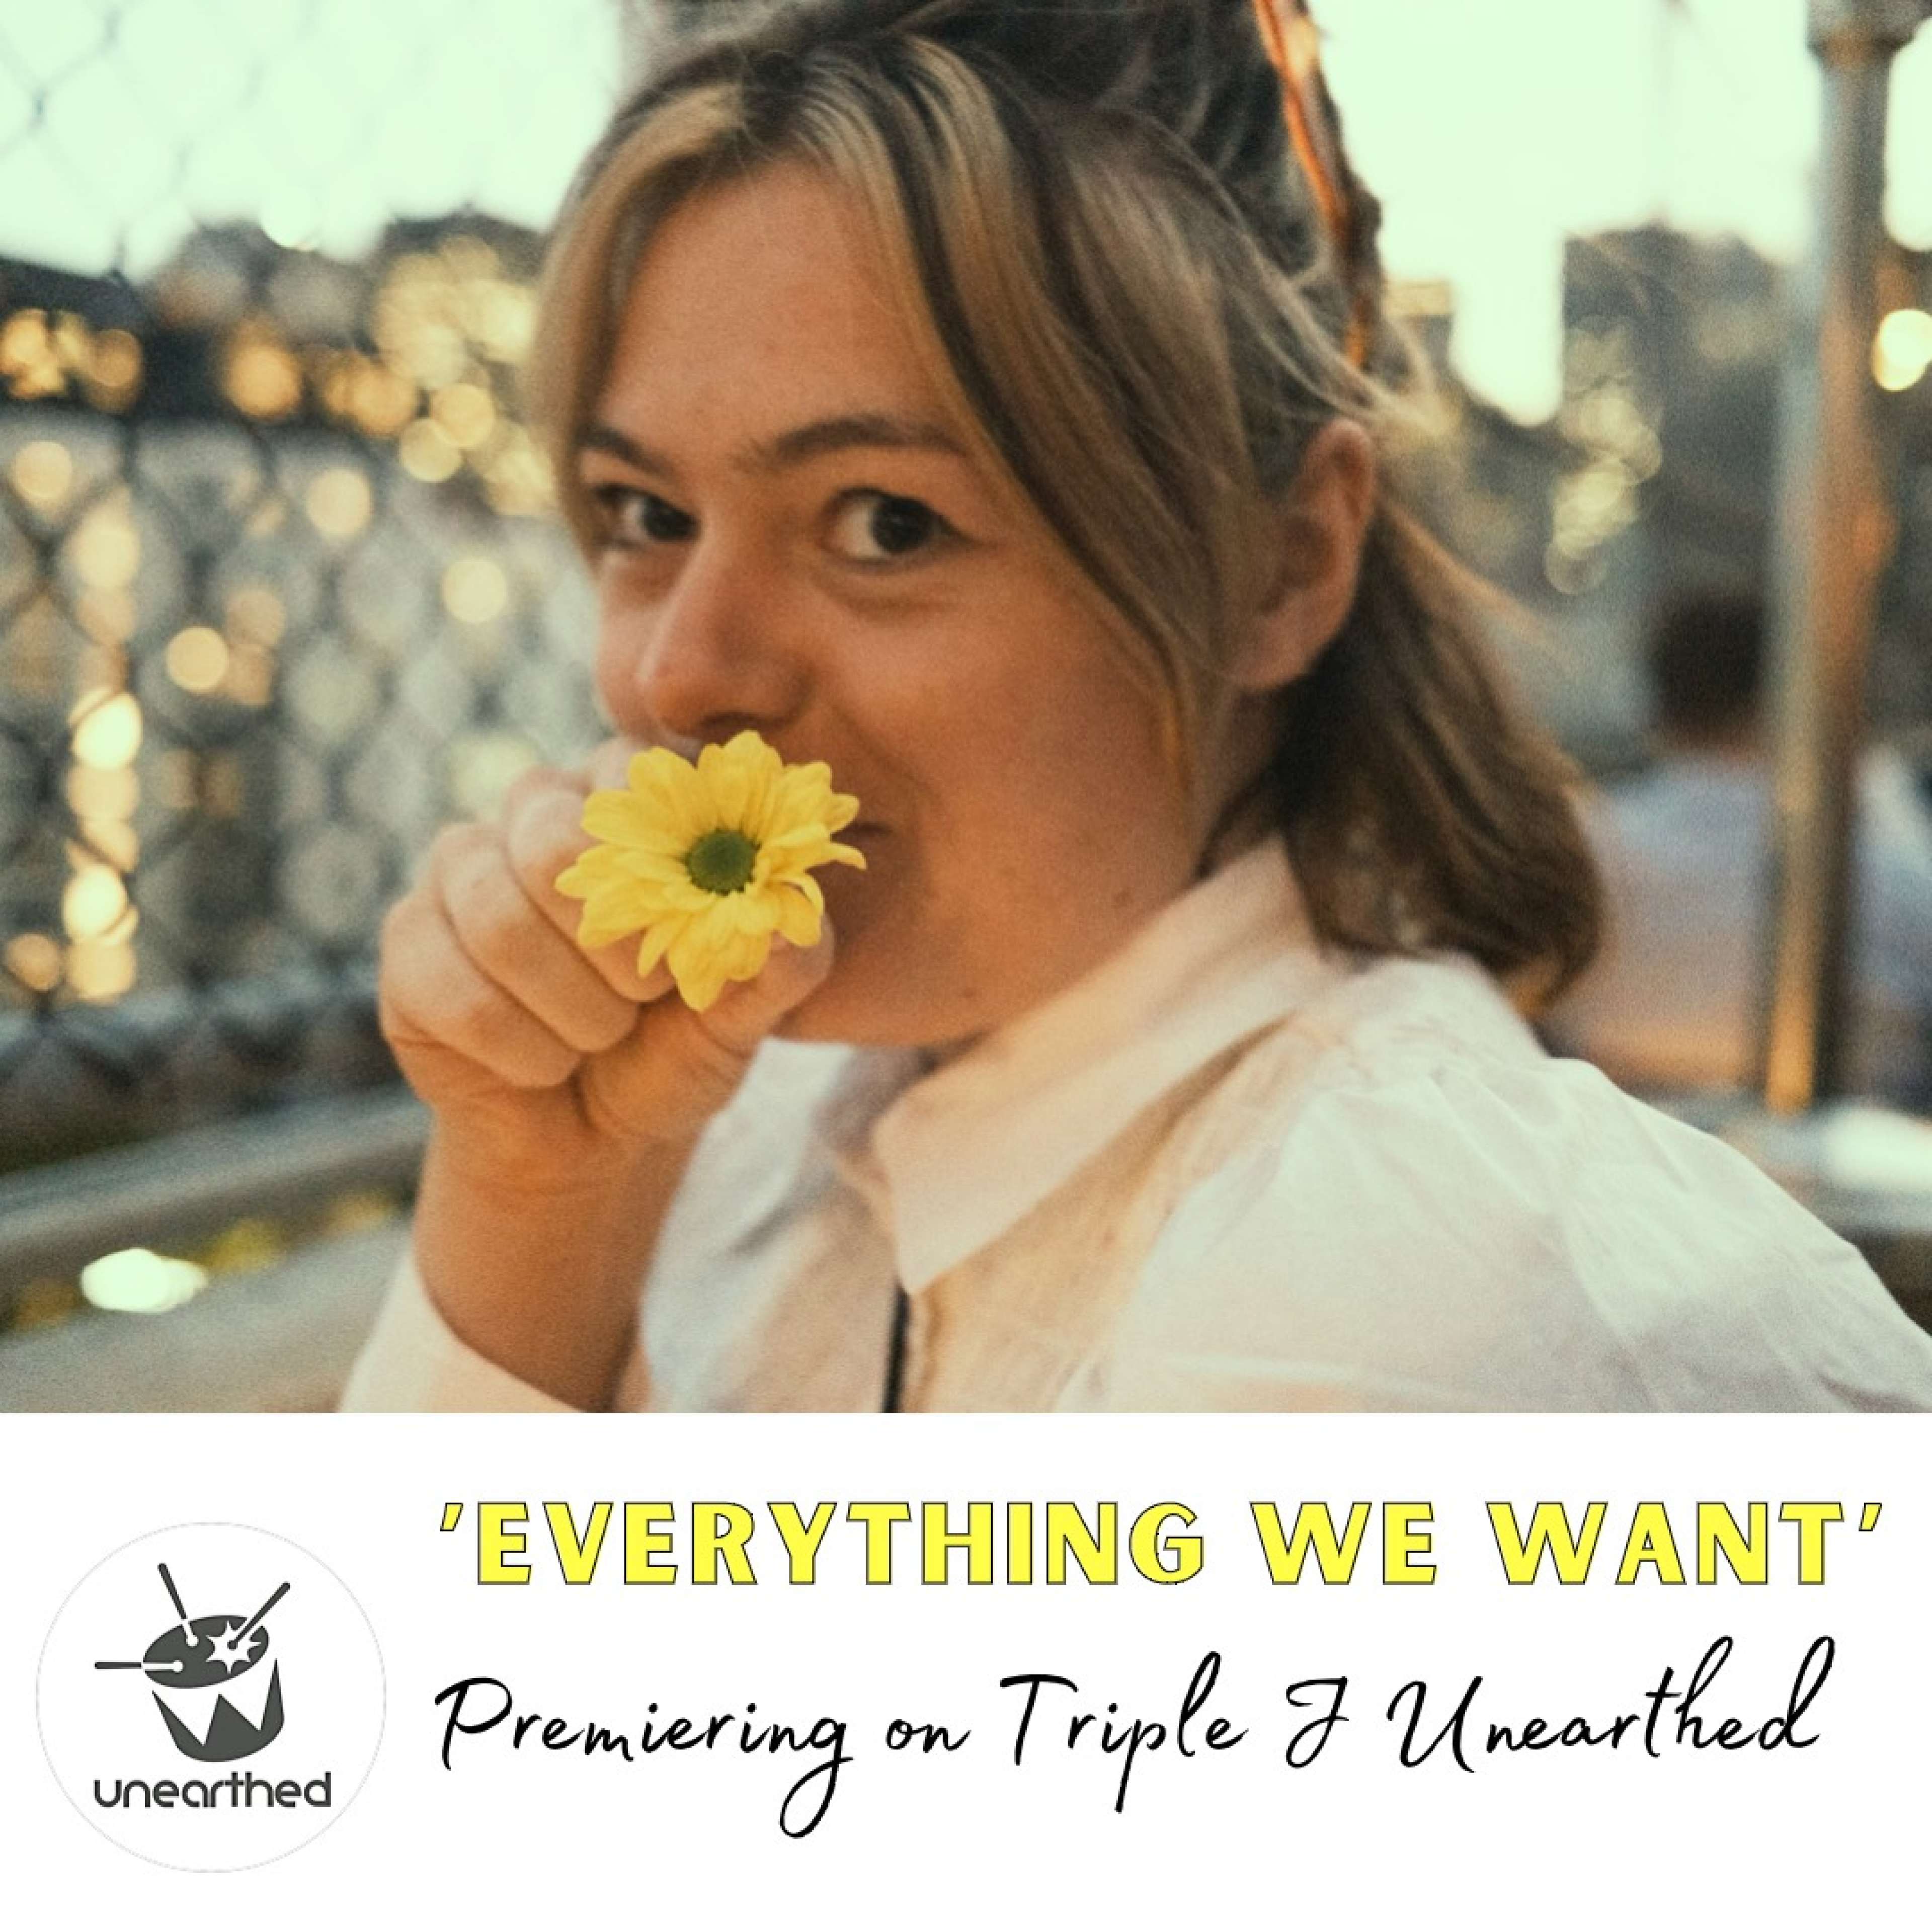 Rya Park - 'Everything We Want' Premiering on Triple J Unearthed 'Tops' Program